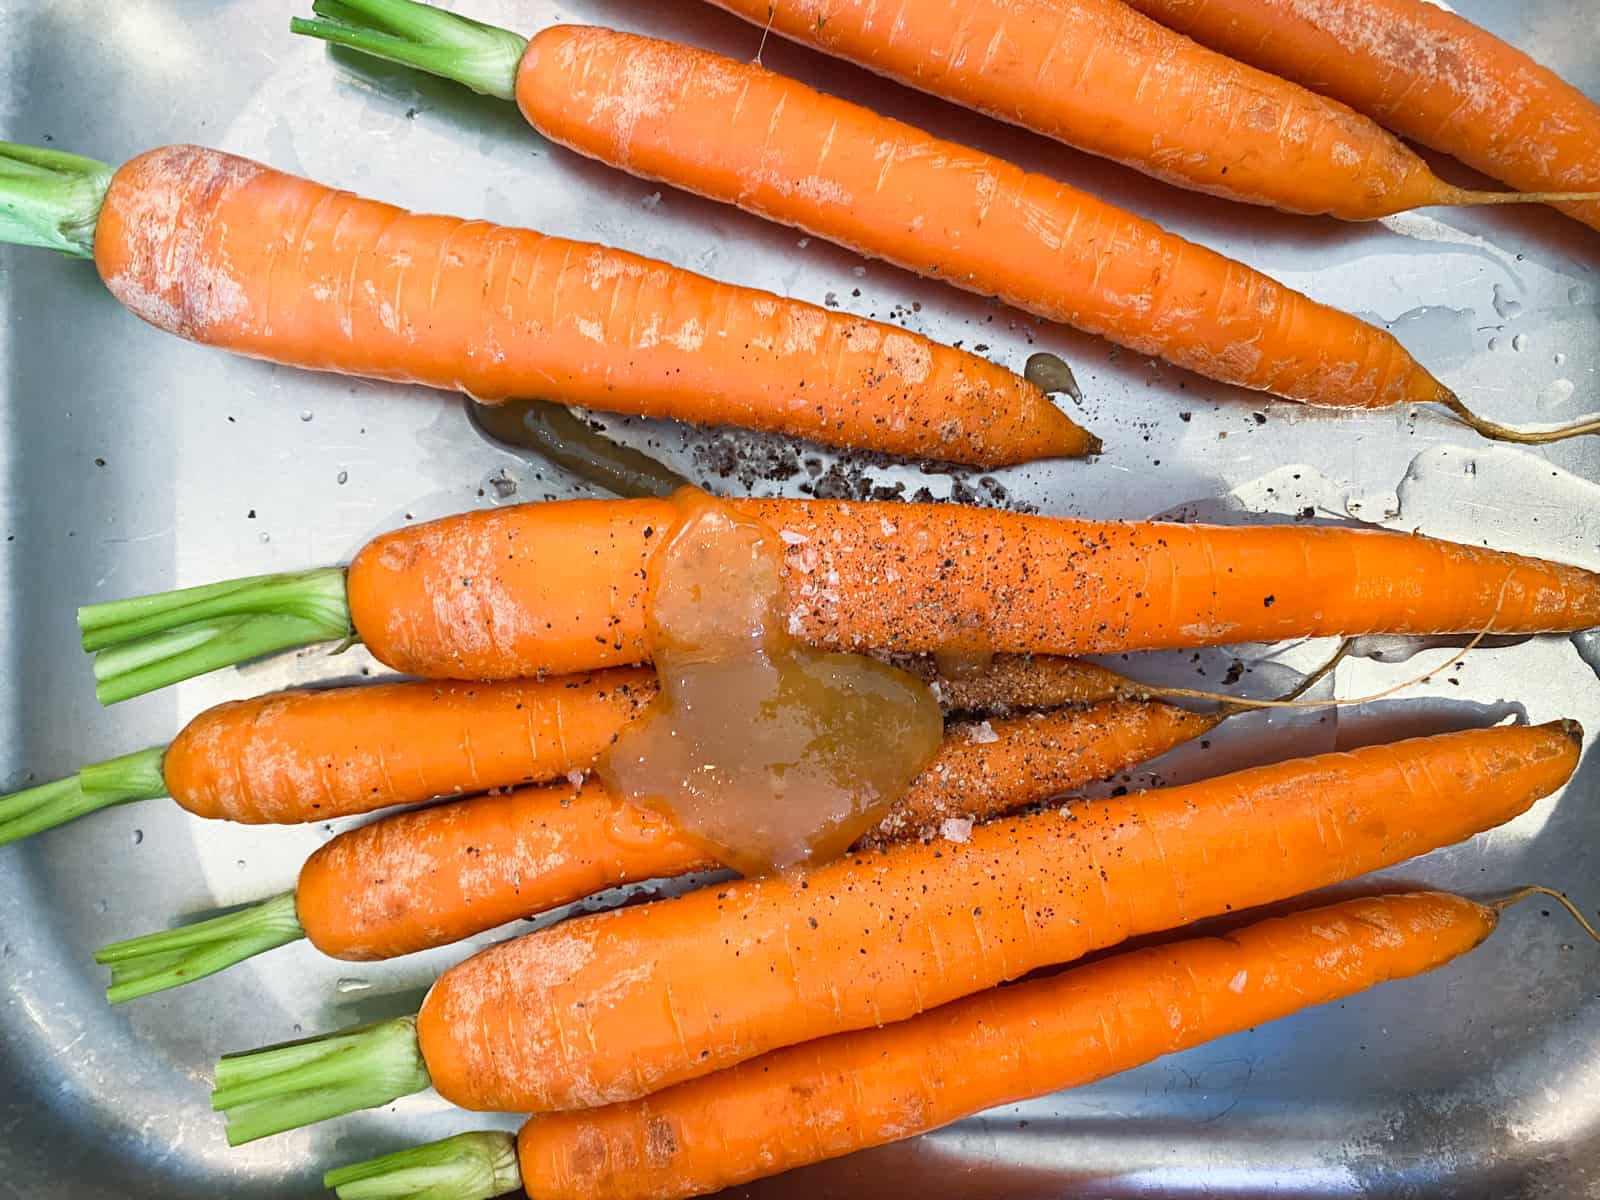 Fresh carrots with tops still in tact with honey, salt, pepper and cumin about to be roasted.